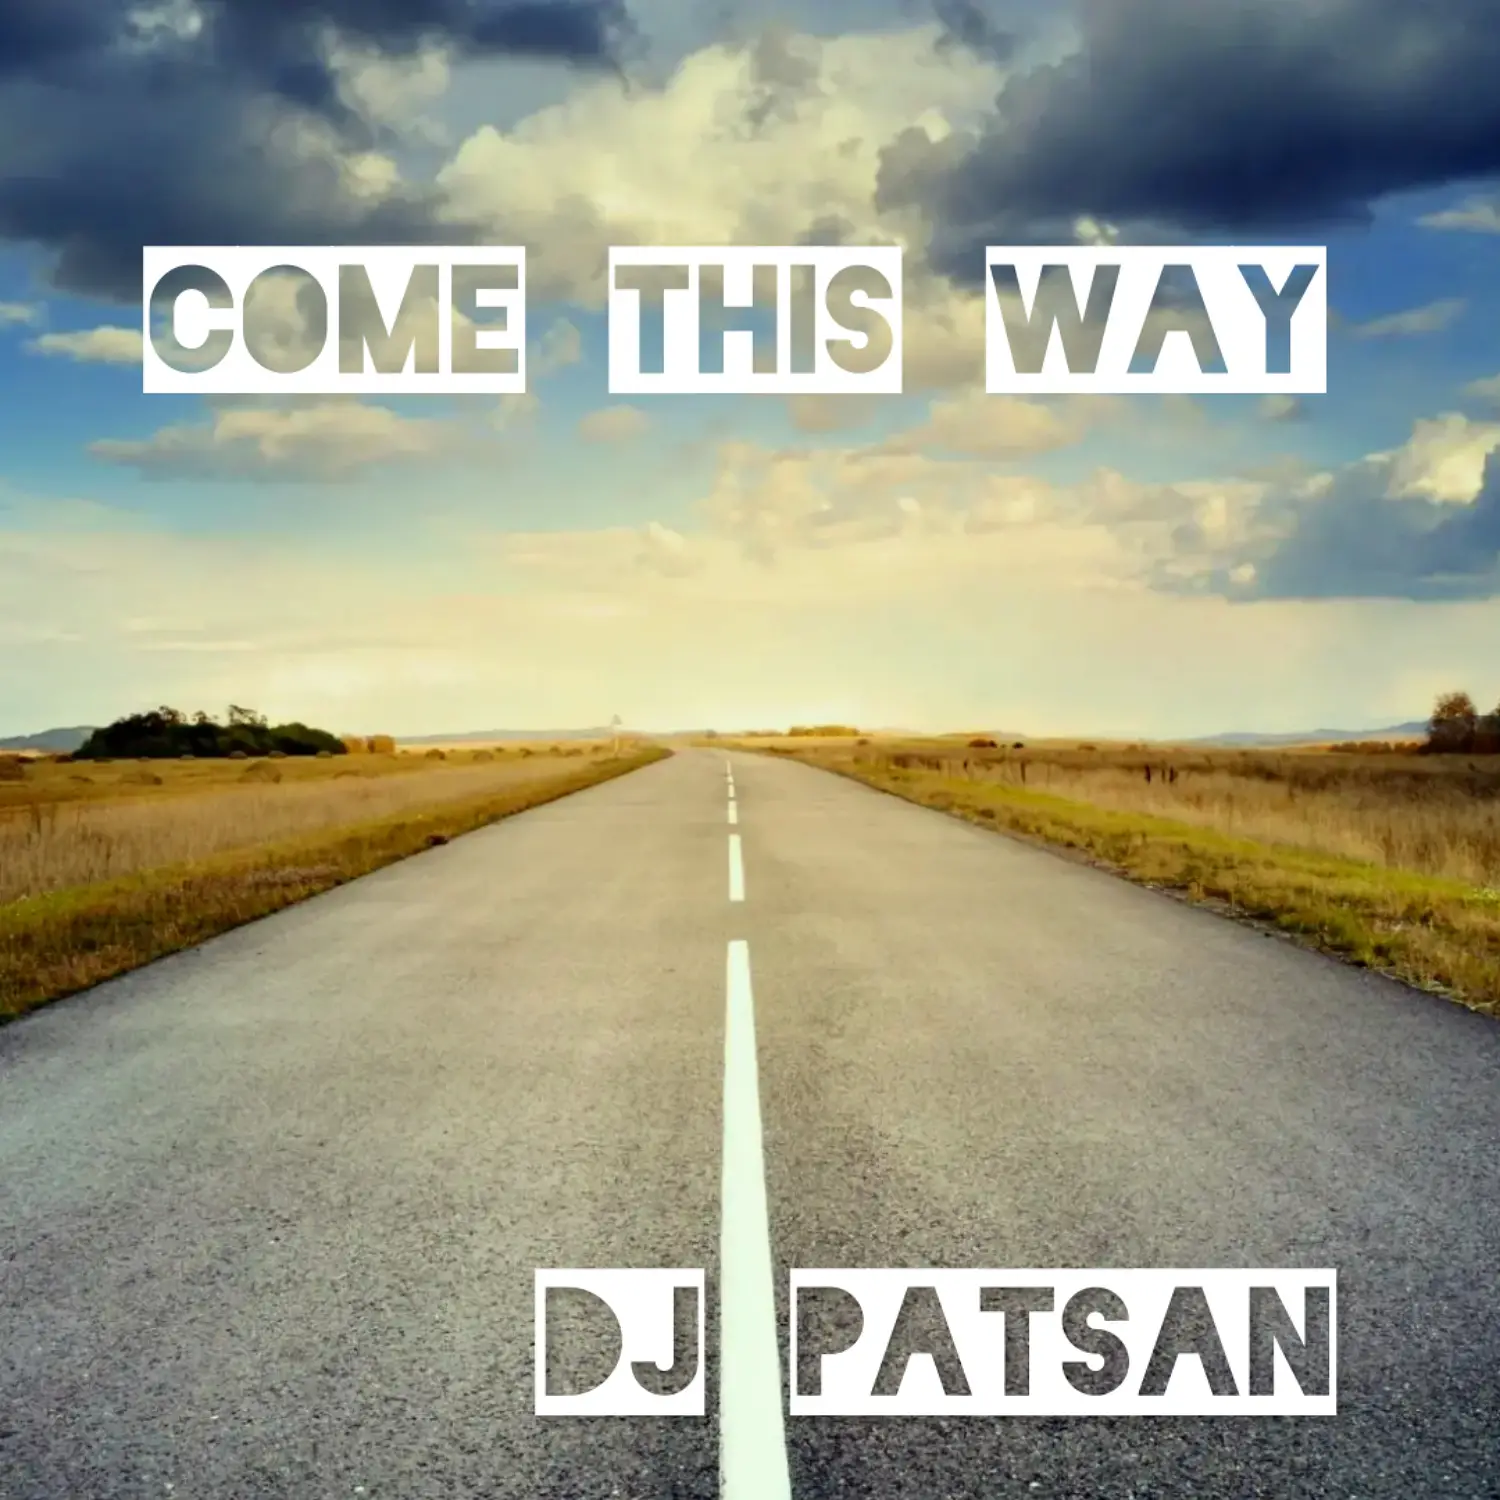 DJ Patsan - "Come This Way" Review | Opinions | LIVING LIFE FEARLESS